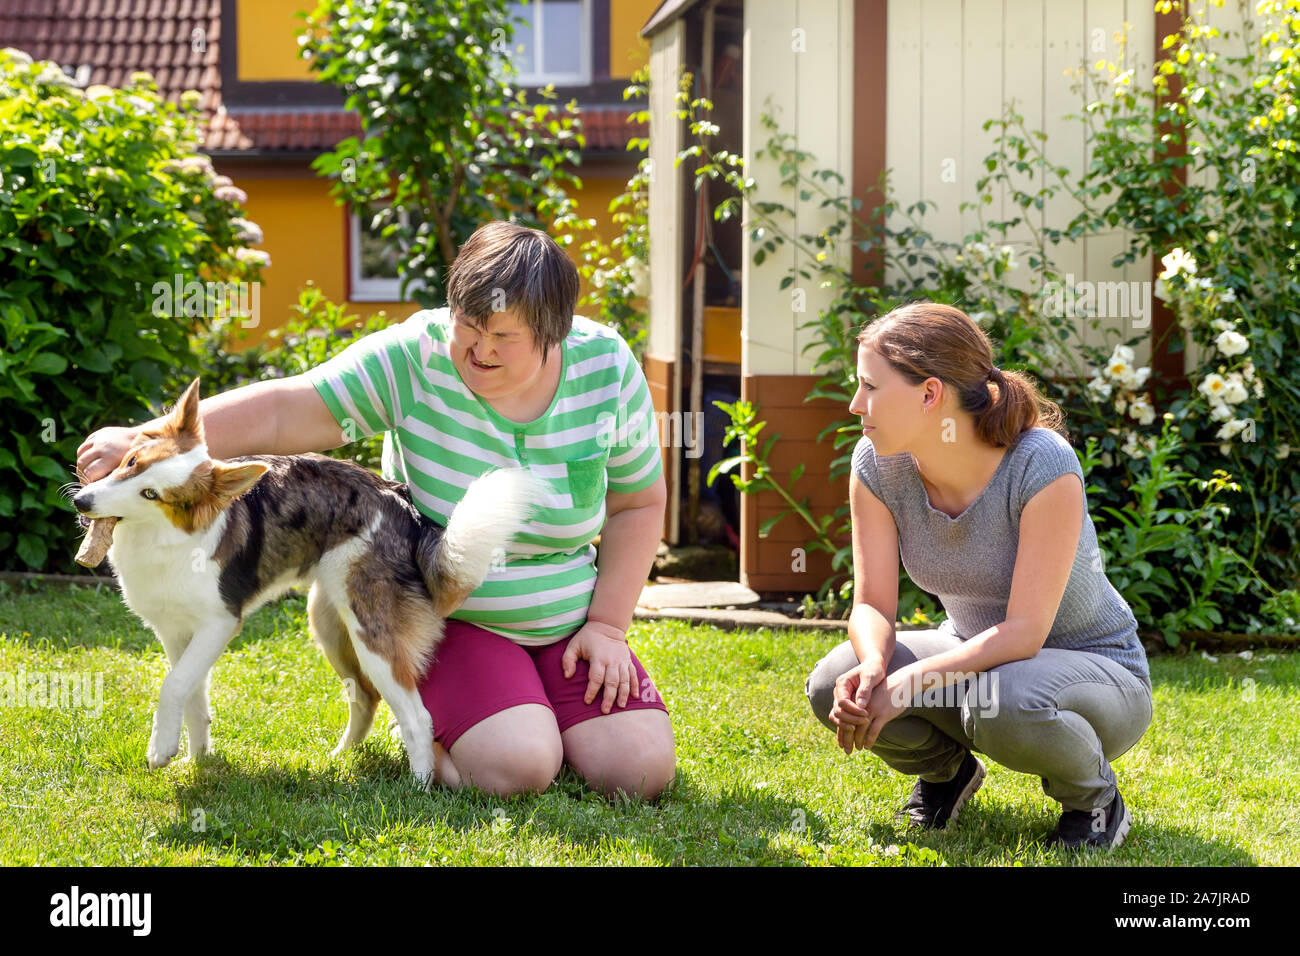 mentally disabled woman with a second woman and a companion dog, concept learning by animal assisted living Stock Photo